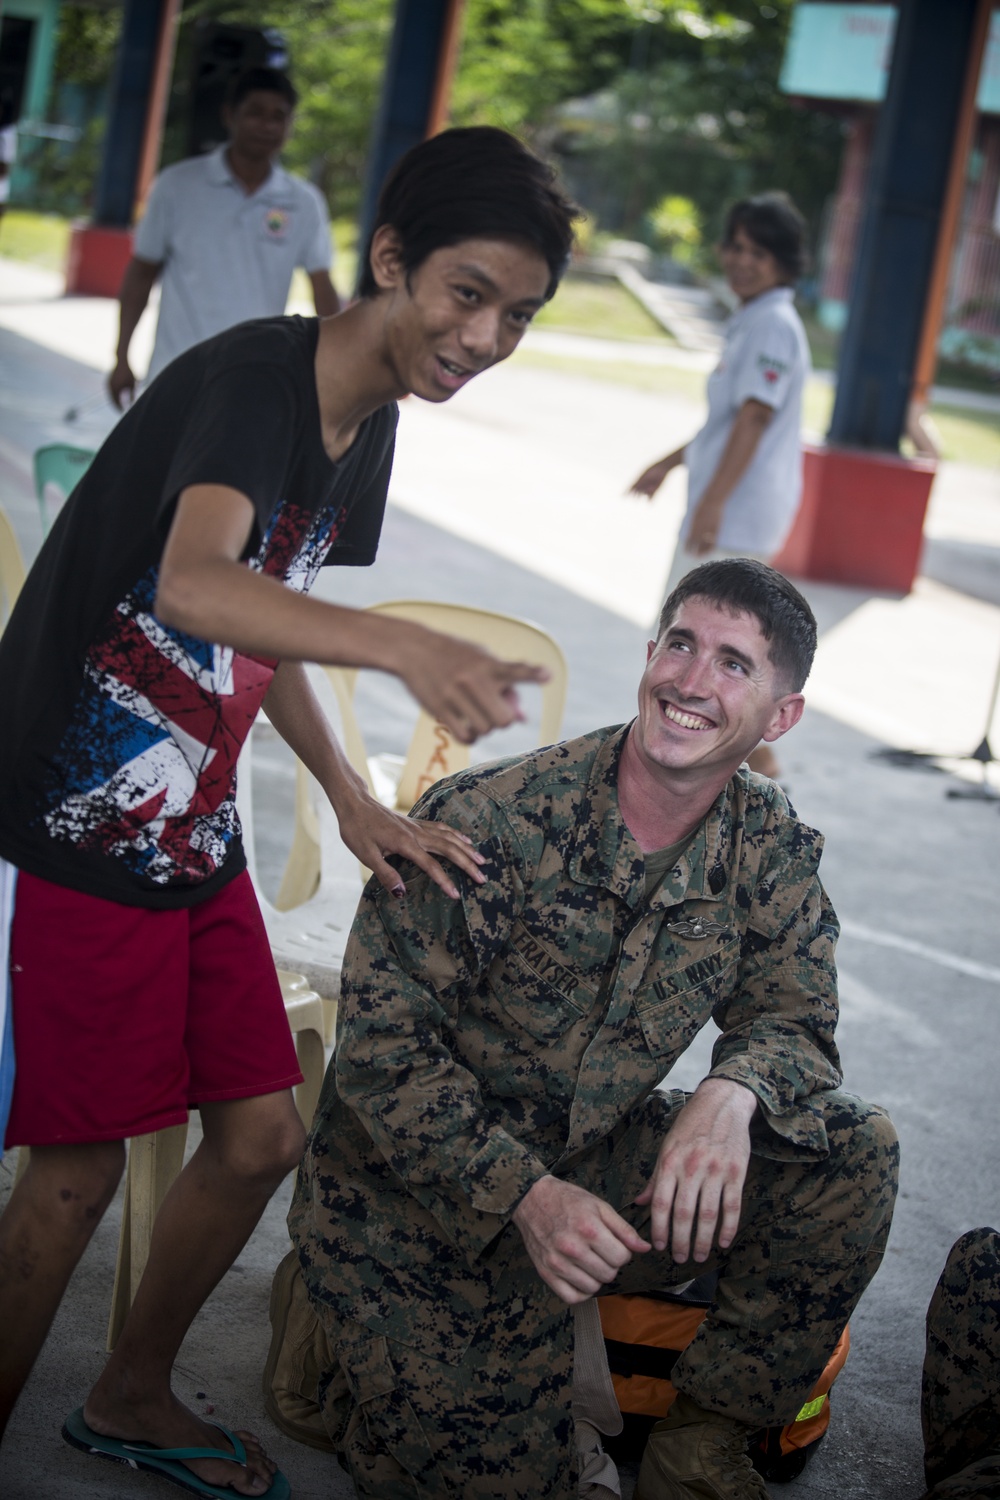 How to Save a Life | U.S. Marines and Navy Corpsmen teach life saving techniques in the Philippines